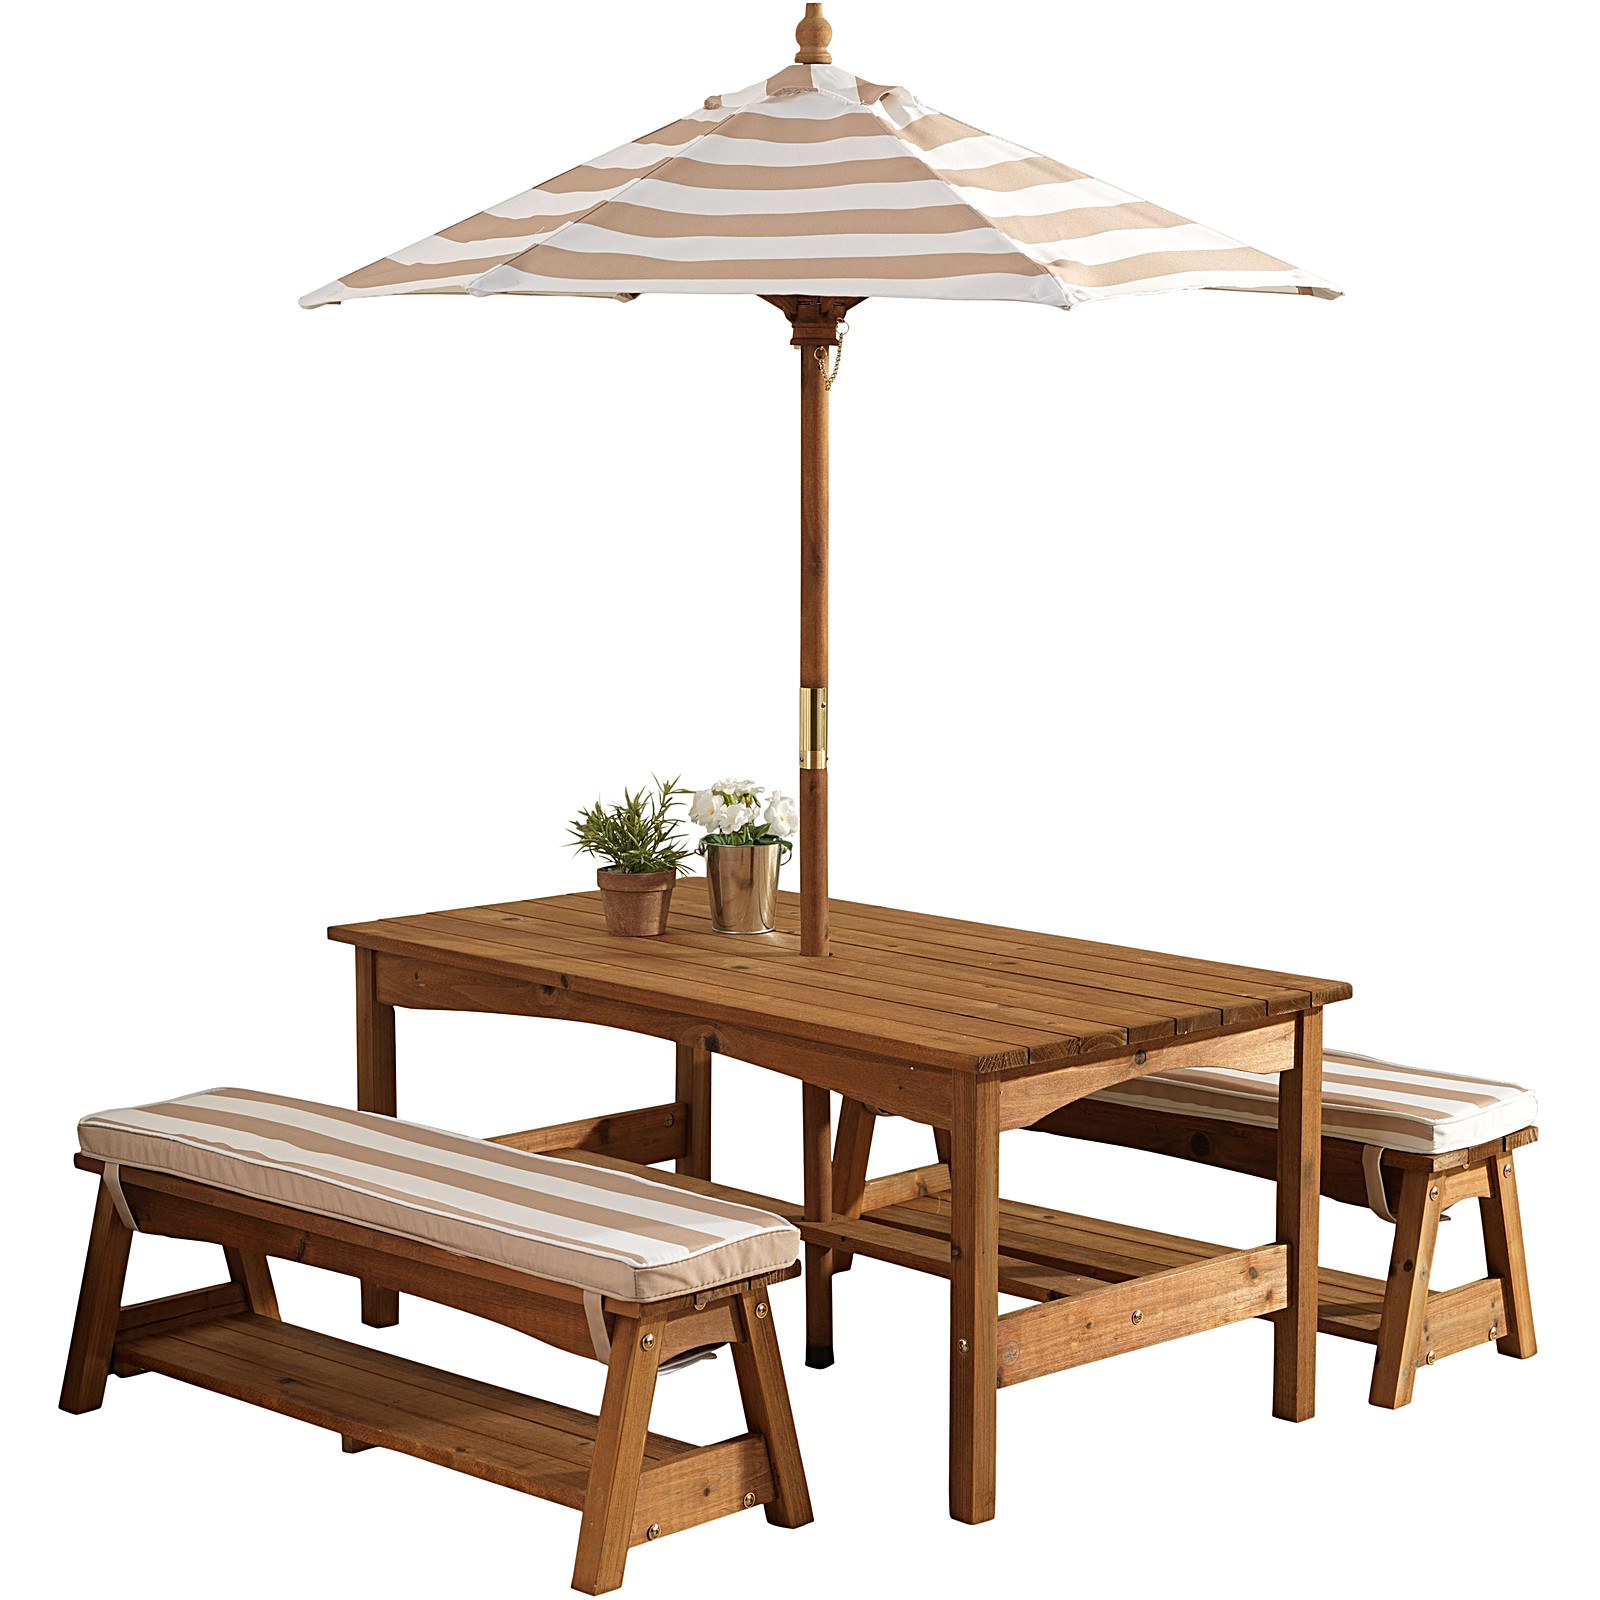 Kids Outdoor Table And Bench
 Kids Outdoor Table & Bench Set with Cushions & Umbrella